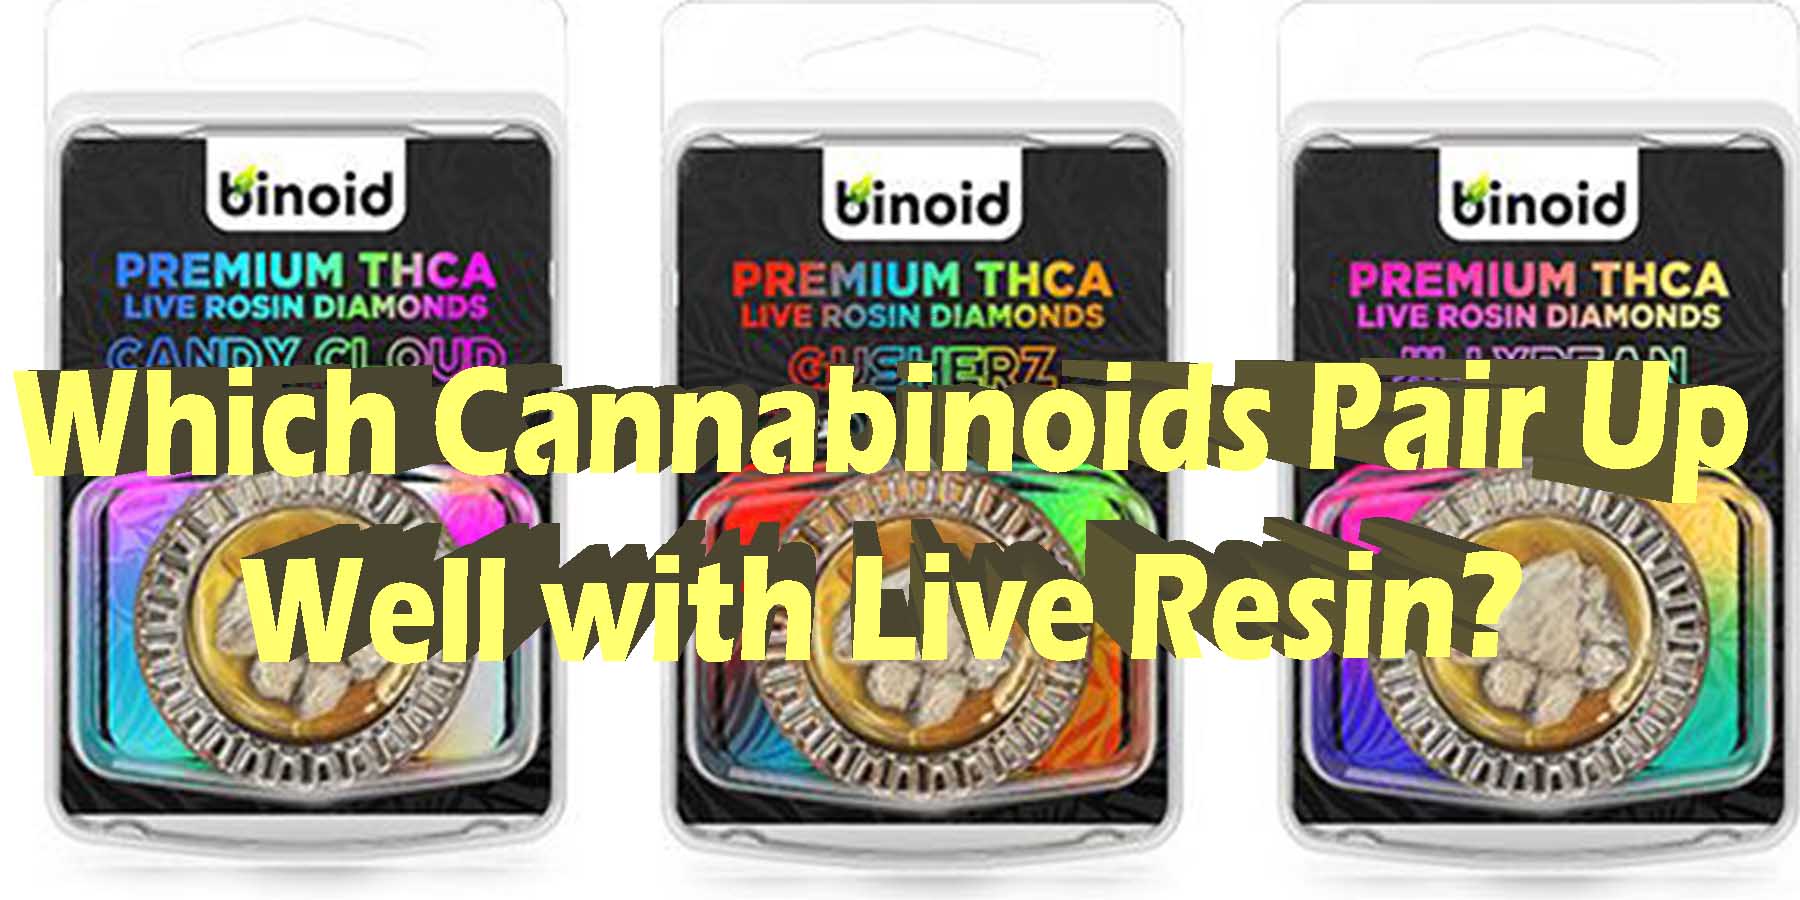 Which Cannabinoids Pair Up Well with Live Resin WhereToGet HowToGetNearMe BestPlace LowestPrice Coupon Discount For Smoking Best Smoke Bloomz.